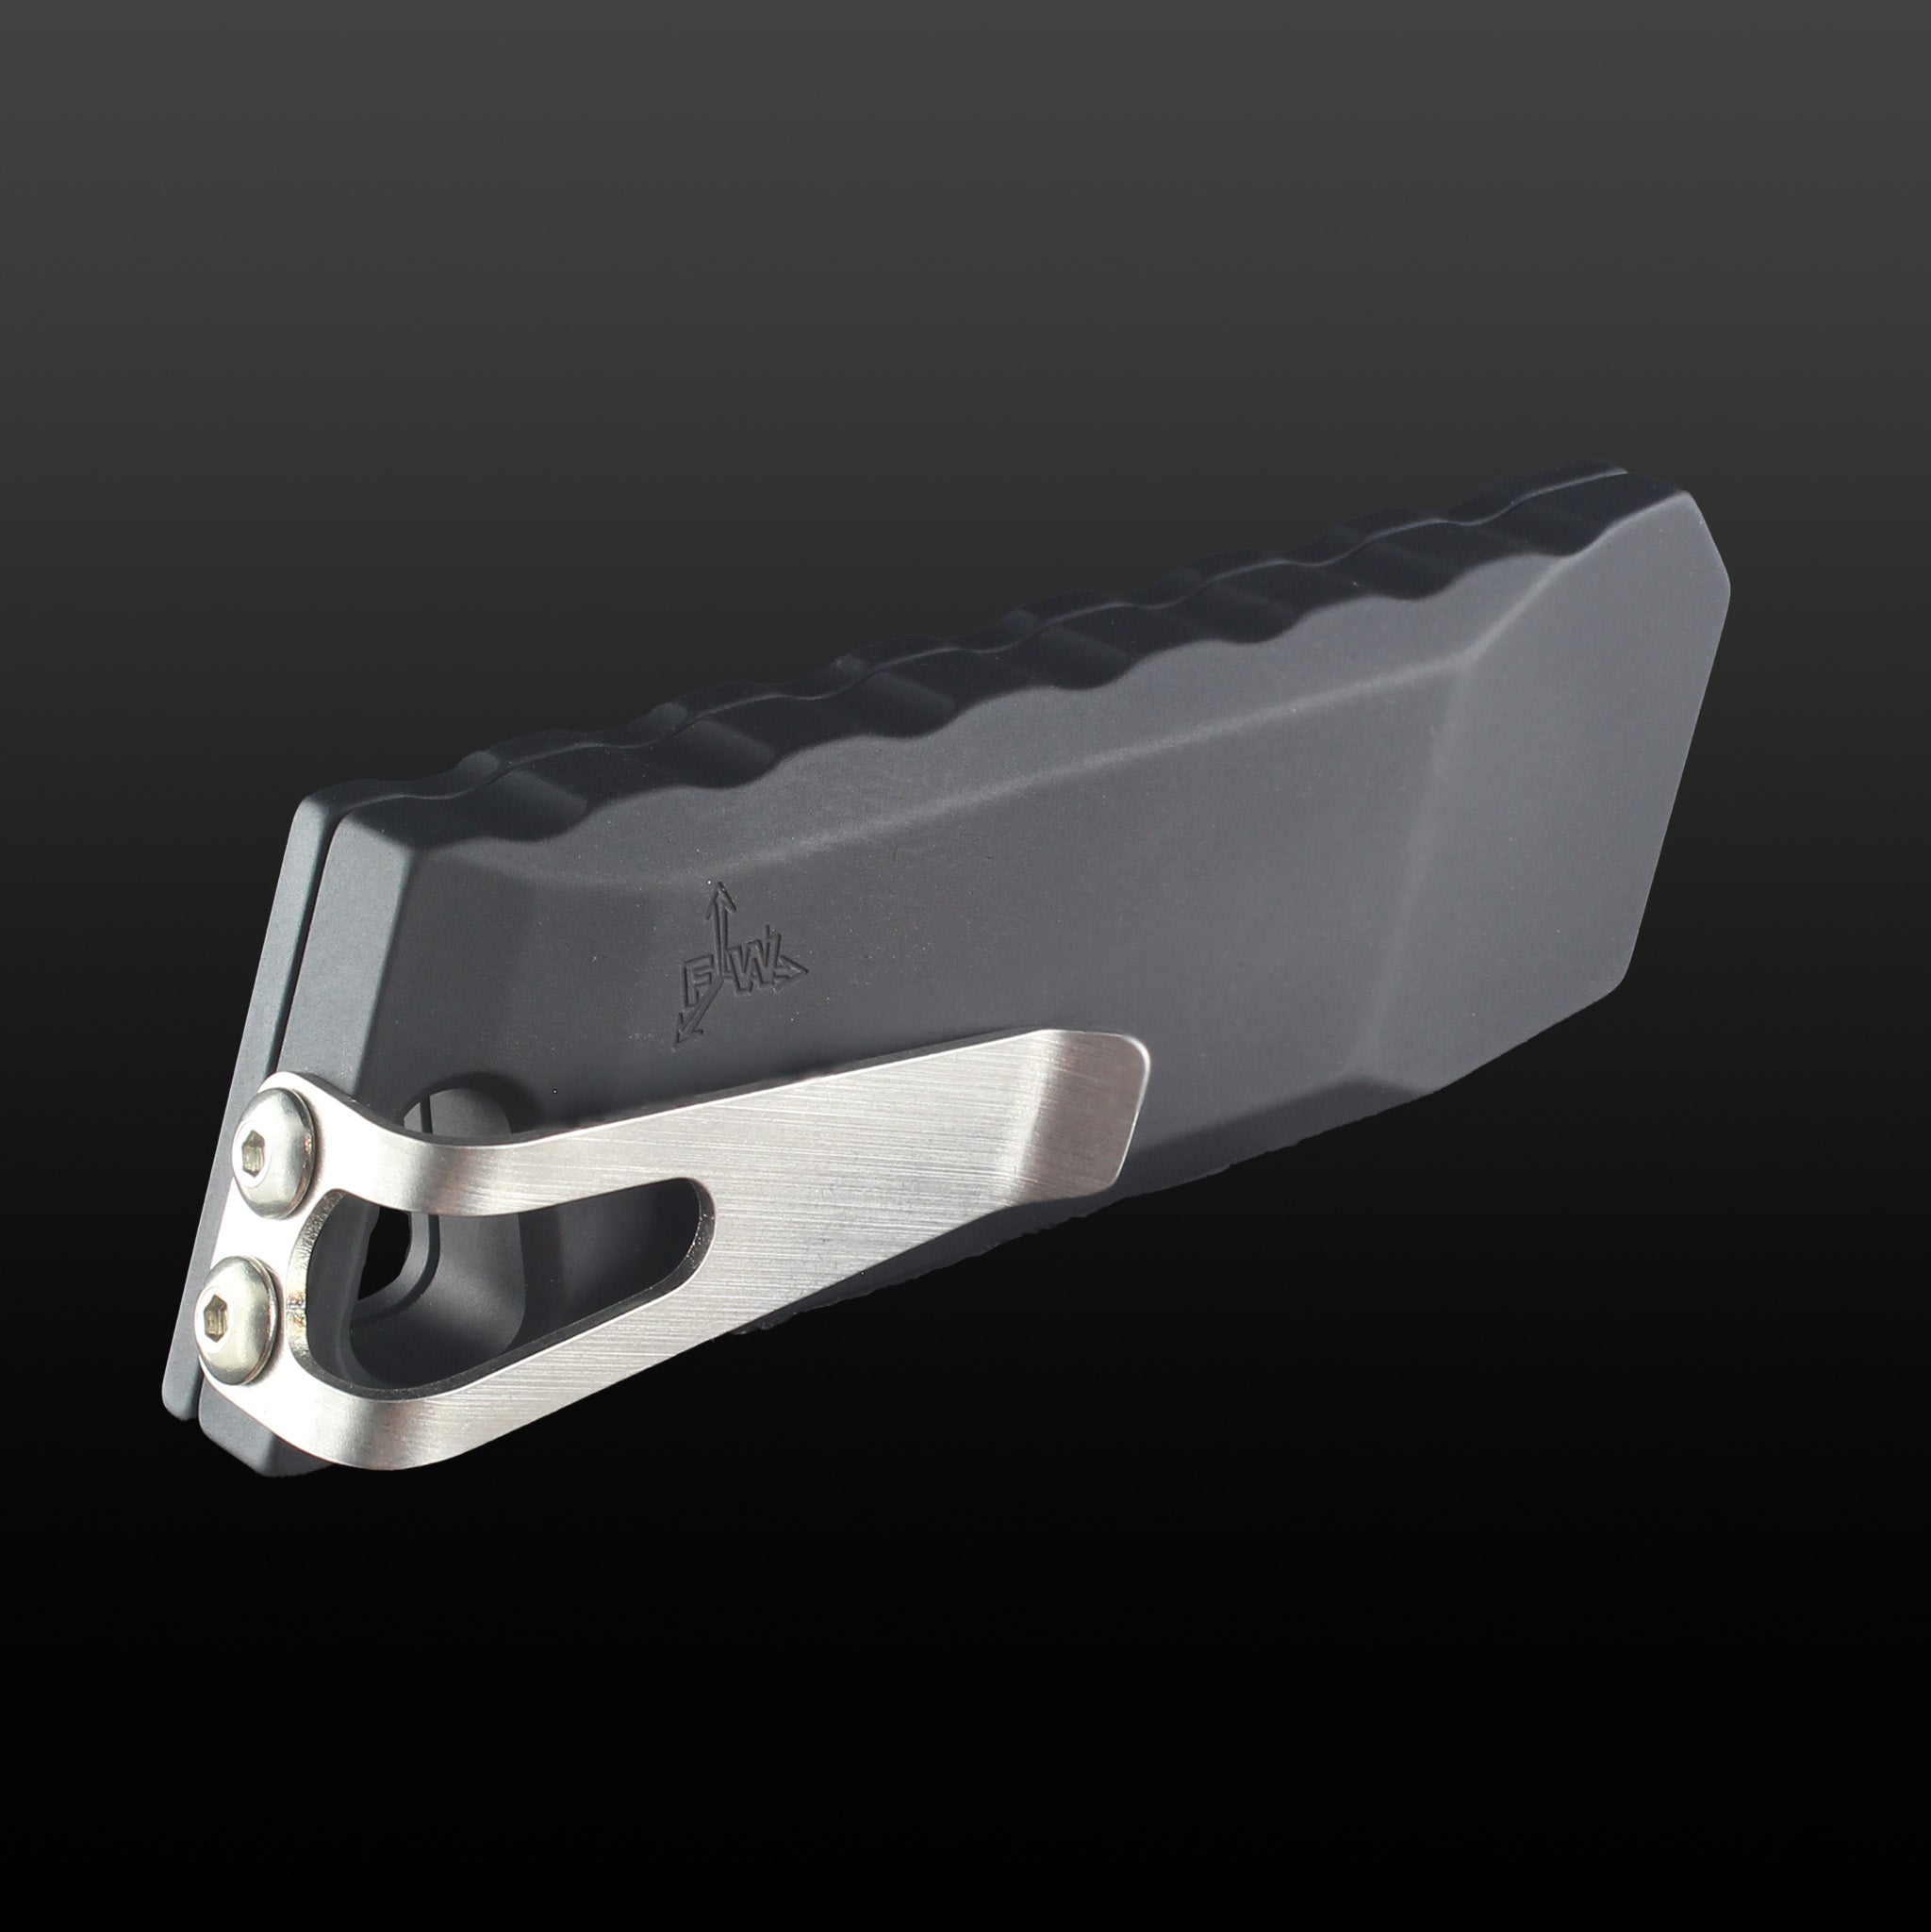 the back of the  black boxcutter showing the pocket clip